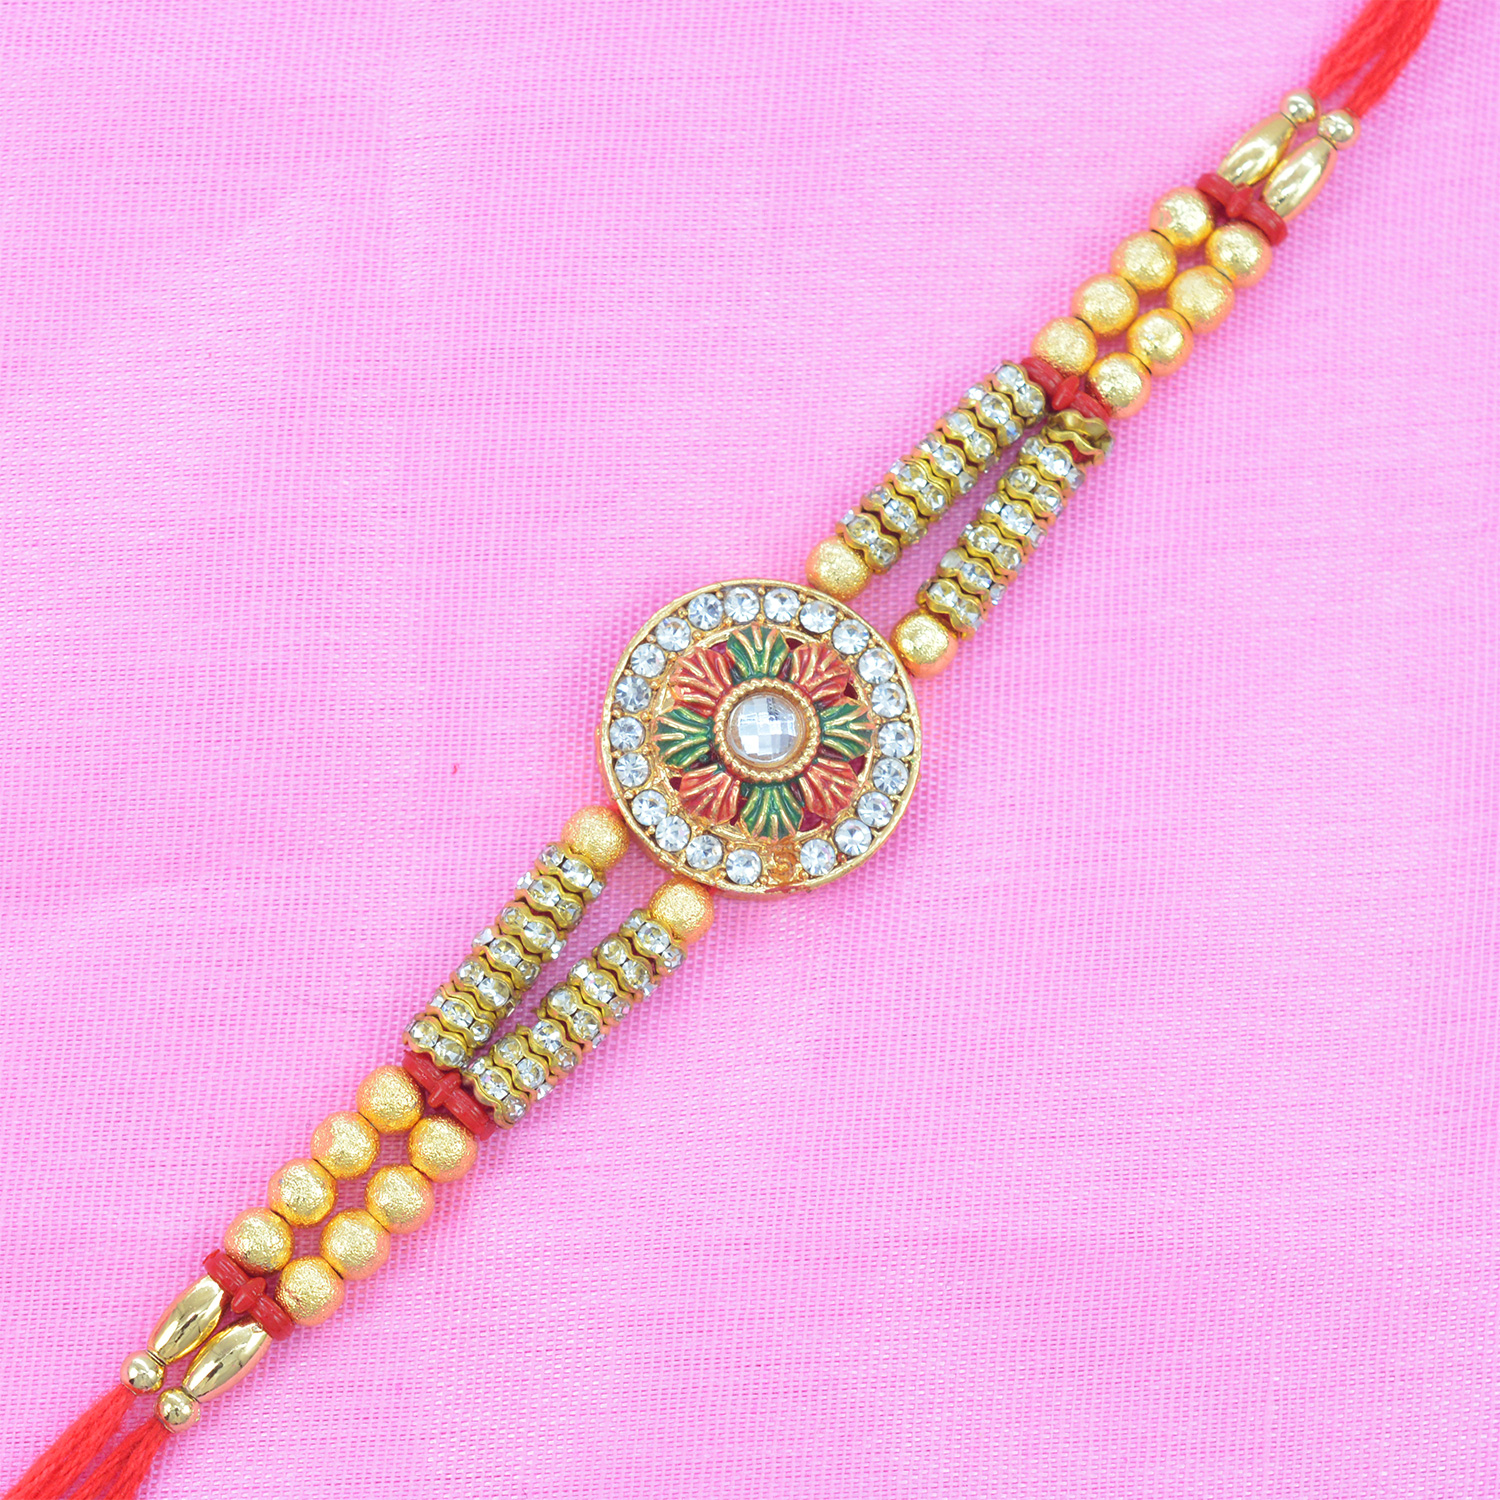 Stunning Multi threaded Coin Shaped Jewel Rakhi for Brother